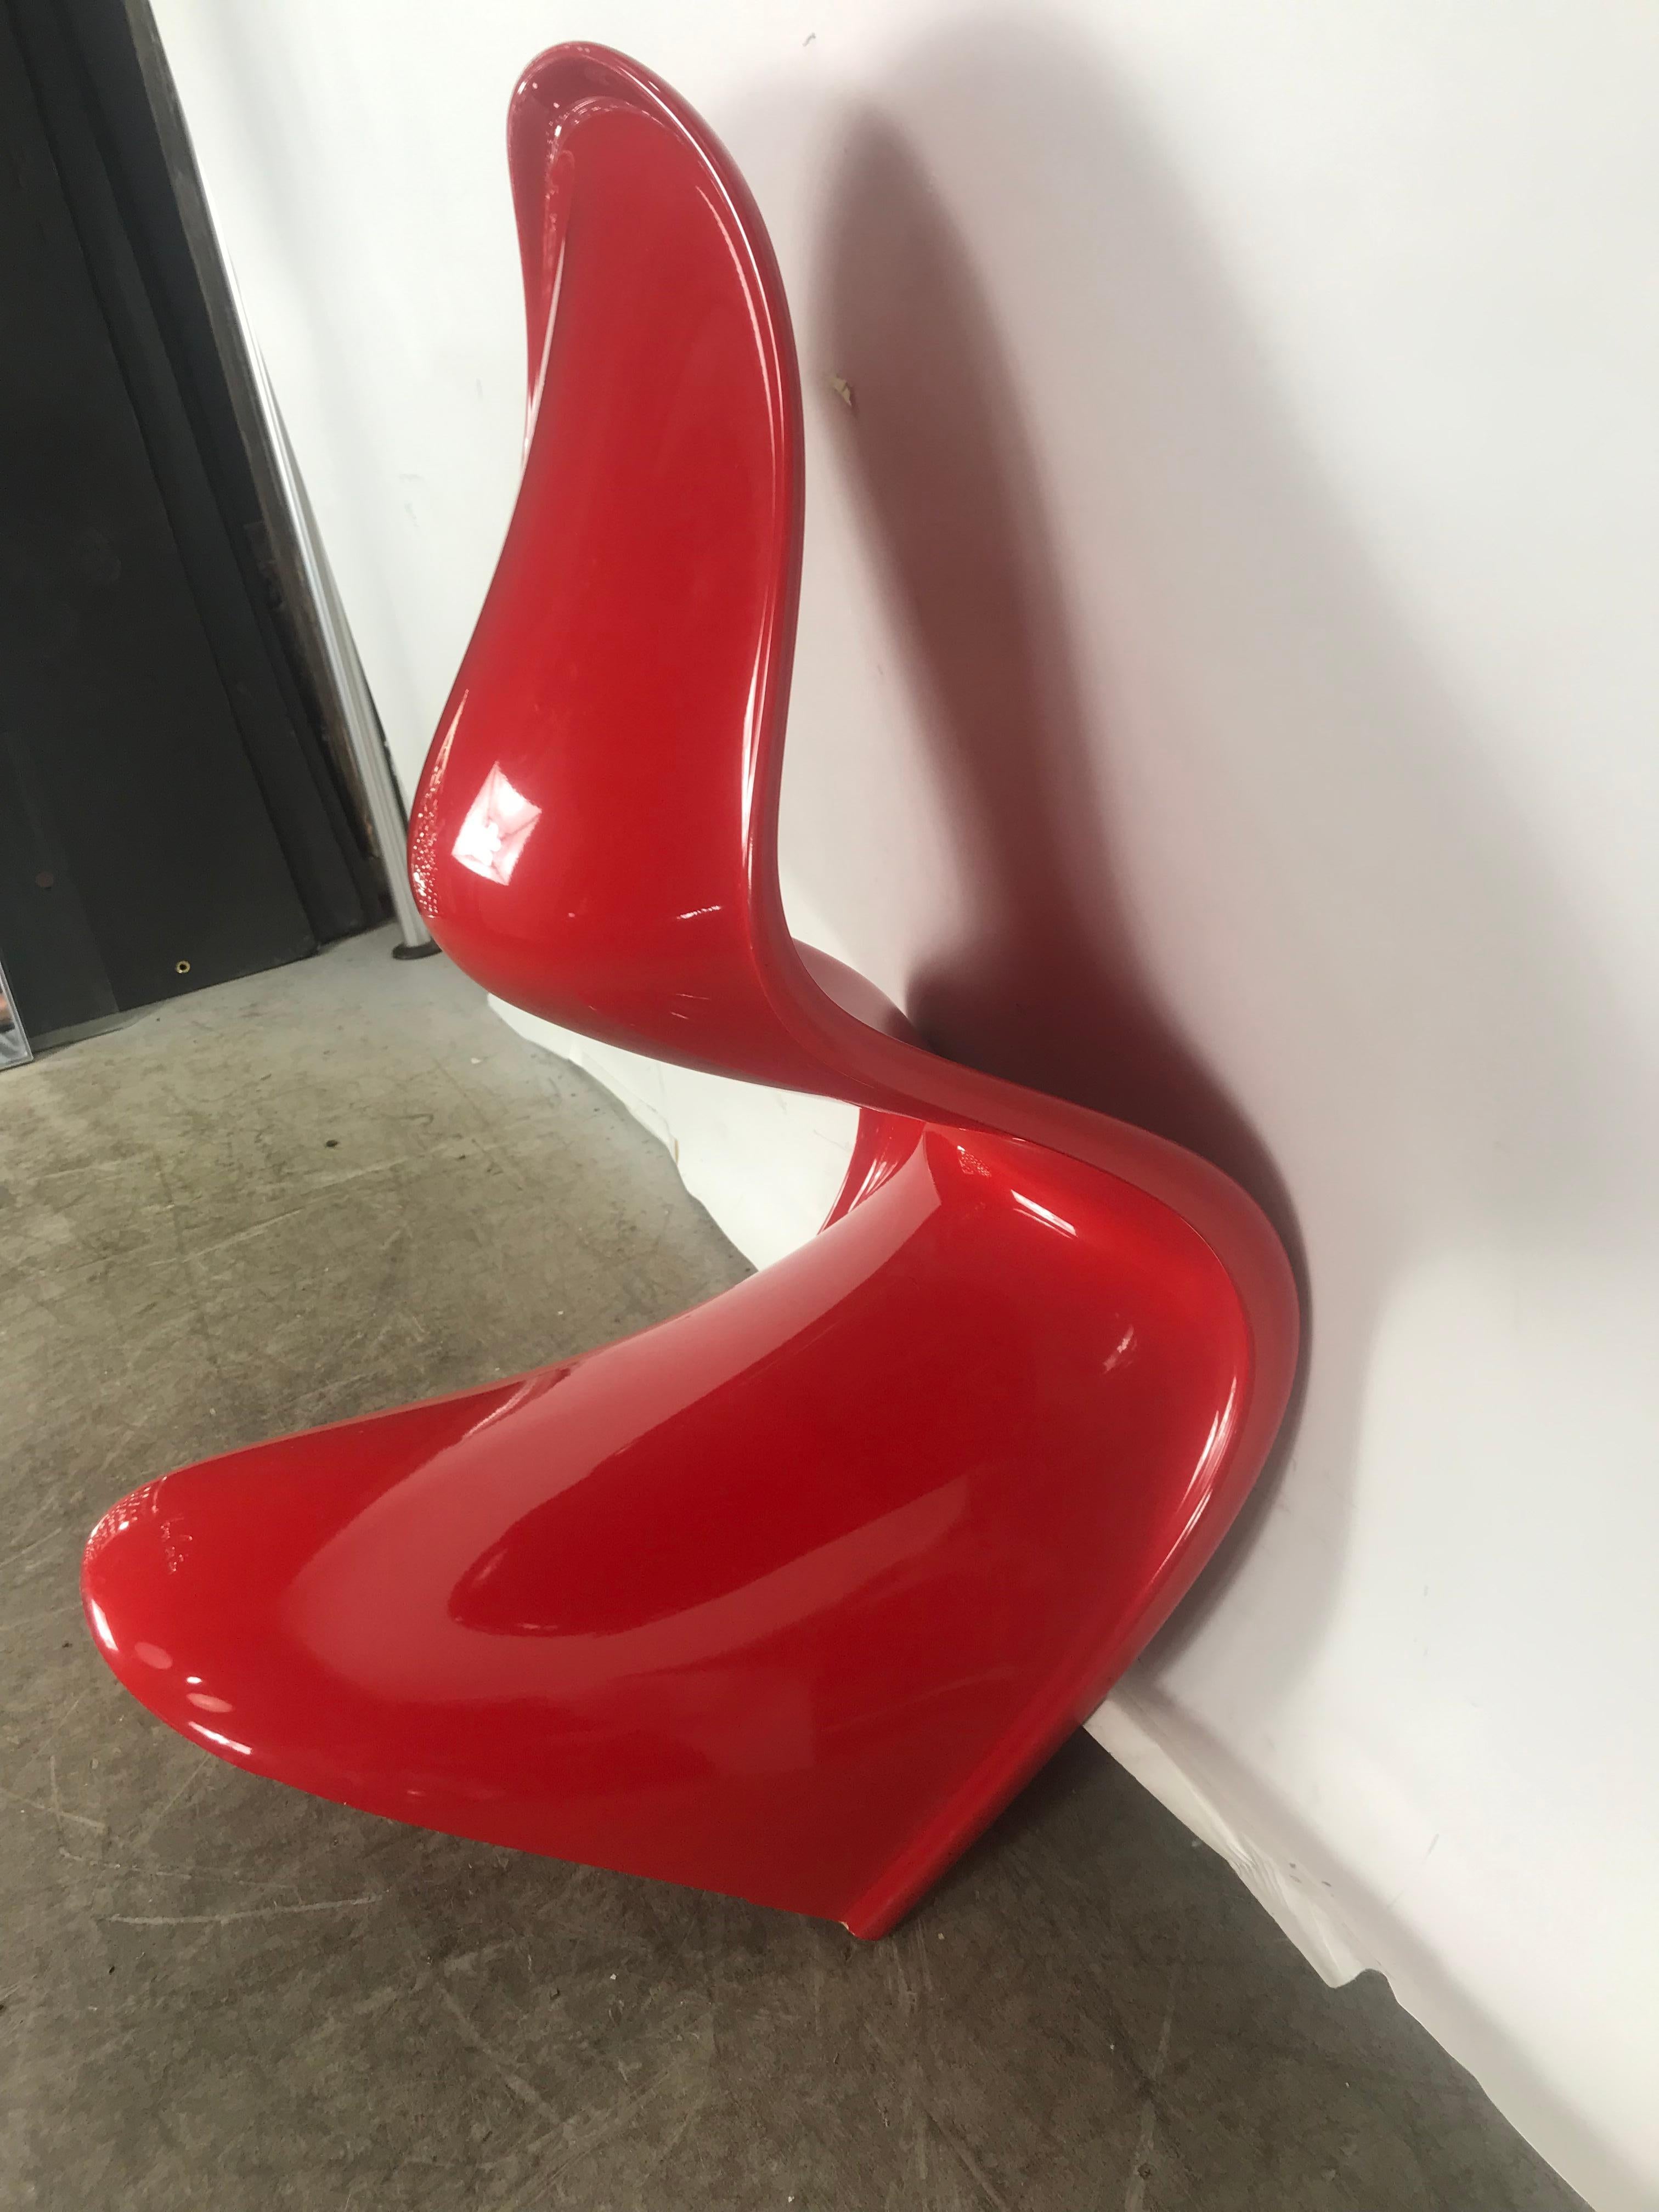 Late 20th Century Classic Pair of Red Molded Plastic 'S' Chairs by Verner Panton for Vitra